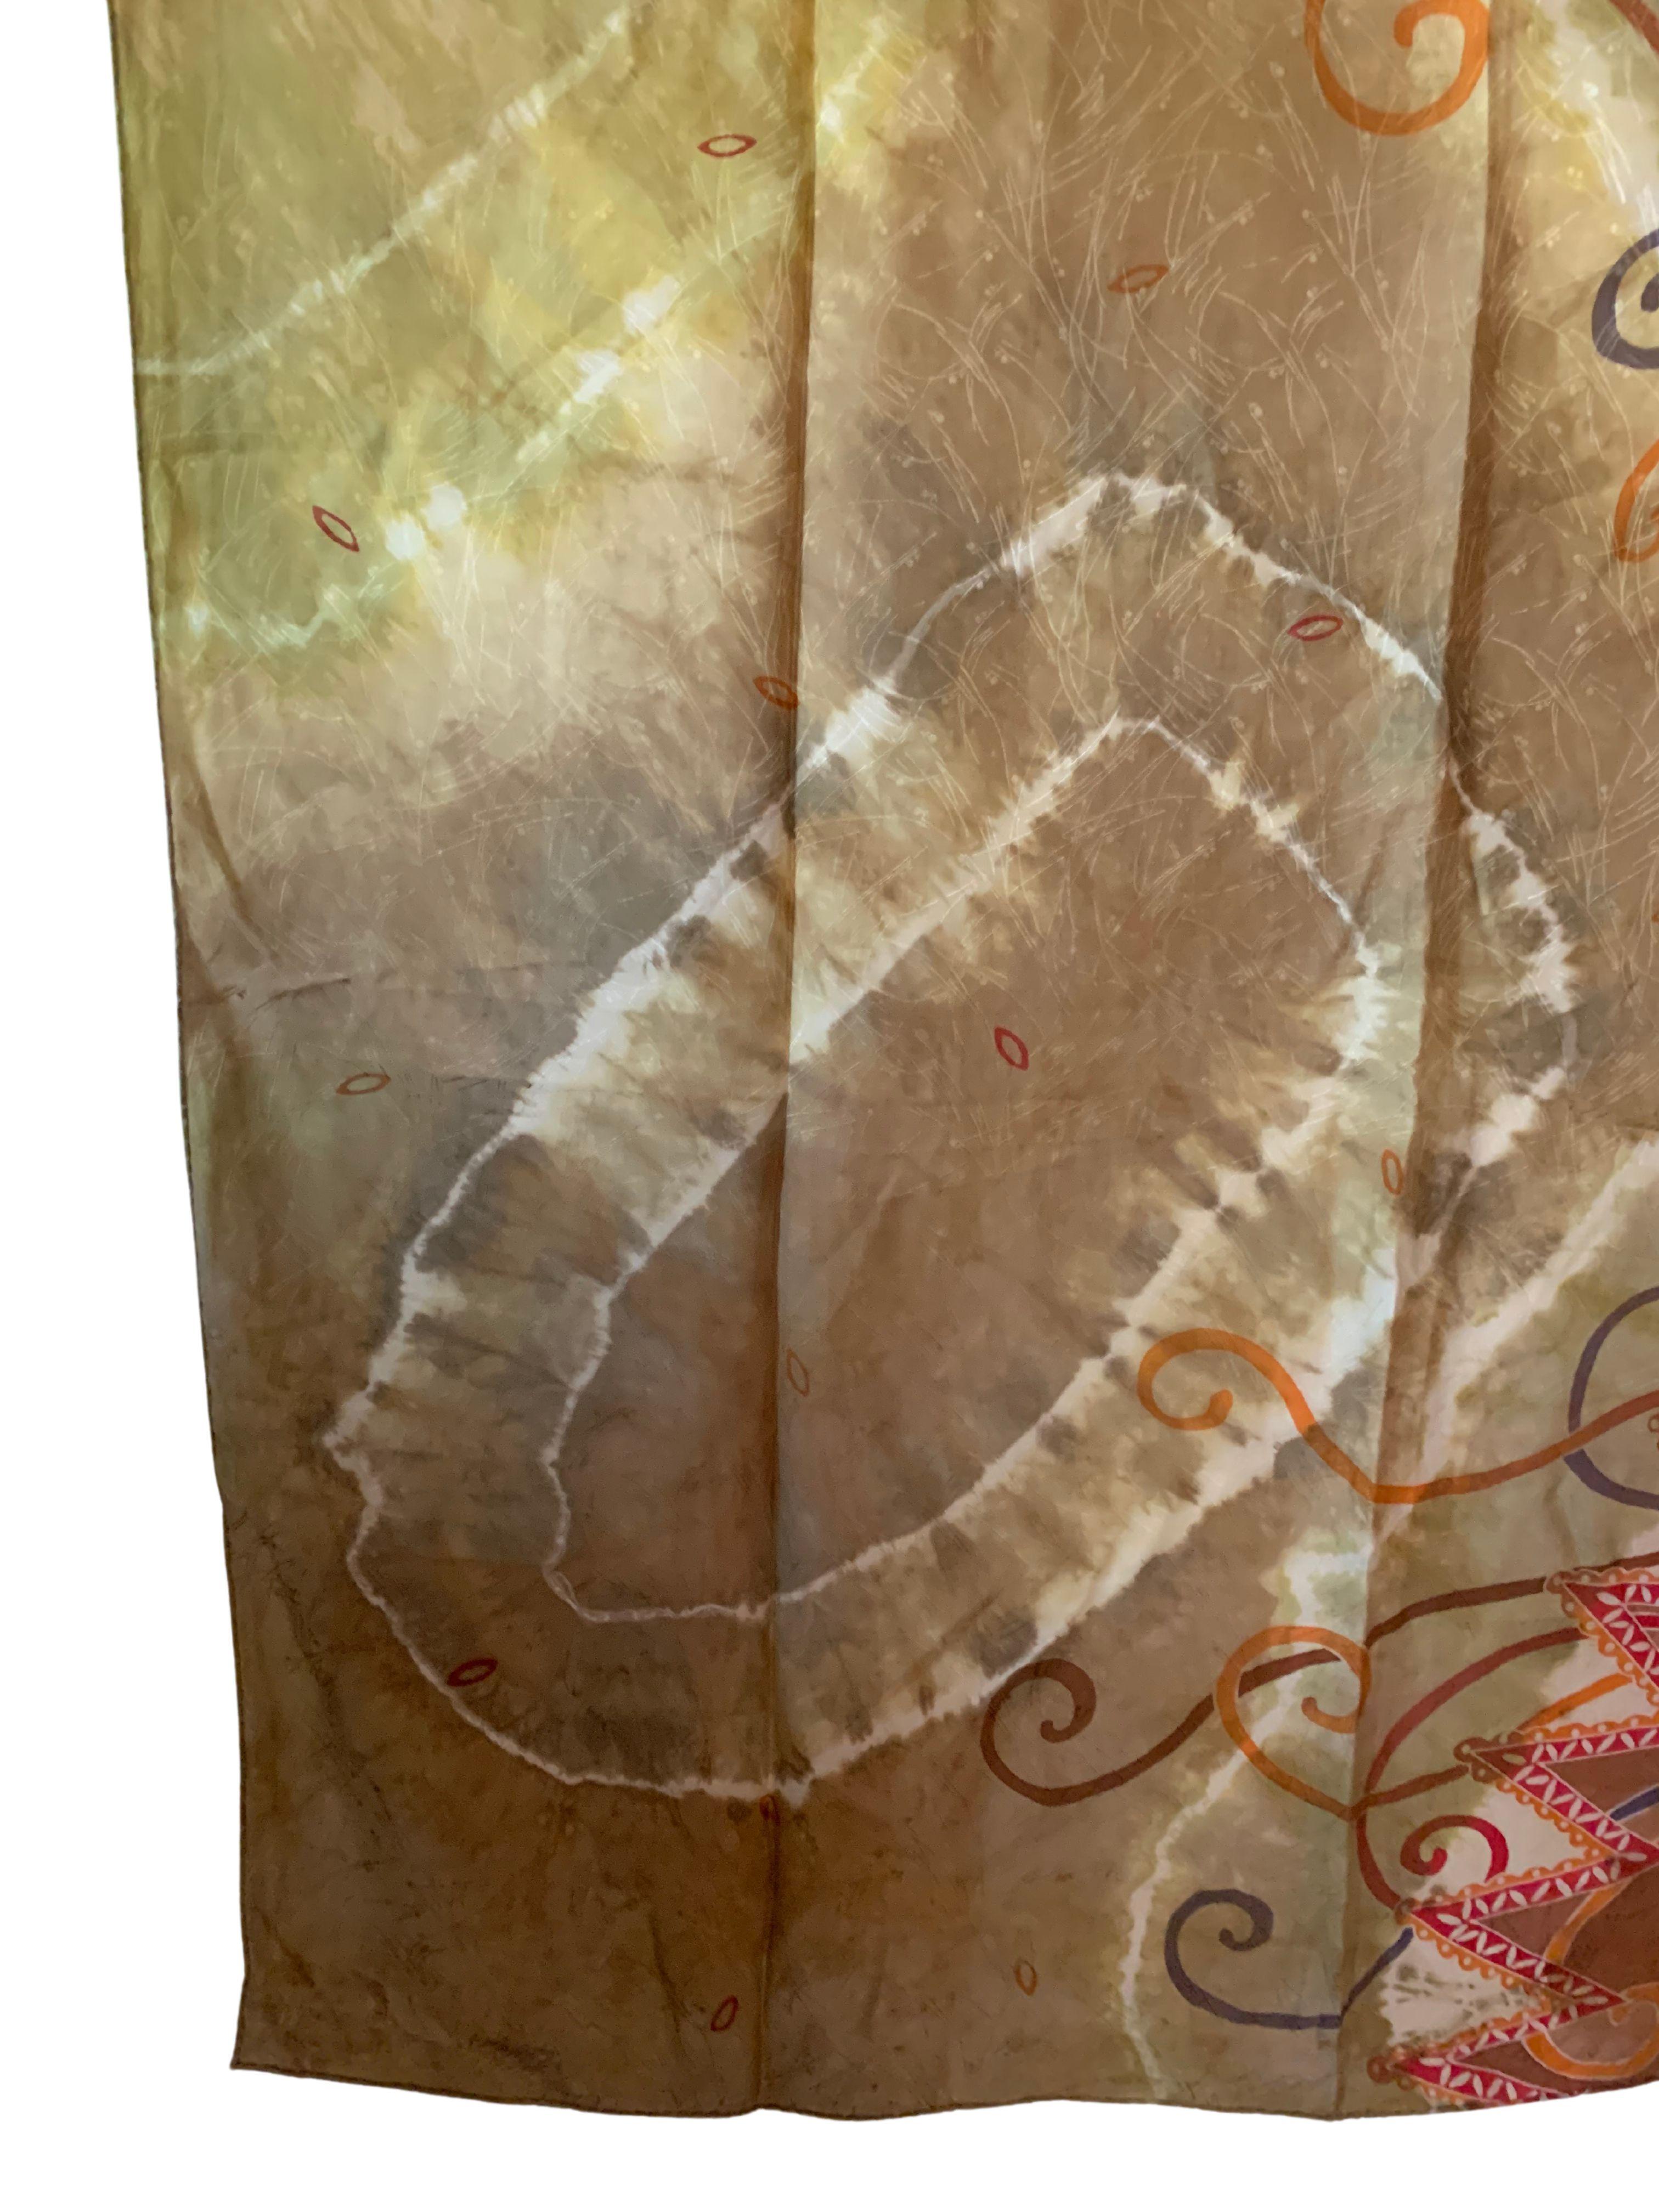 A wonderful hand-crafted shantung silk textile from Malaysia with stunning detailing and shades. Shantung silk is a medium-weight, plain-weave silk fabric which is woven from irregular threads and so has a rough texture. A wonderful decorative